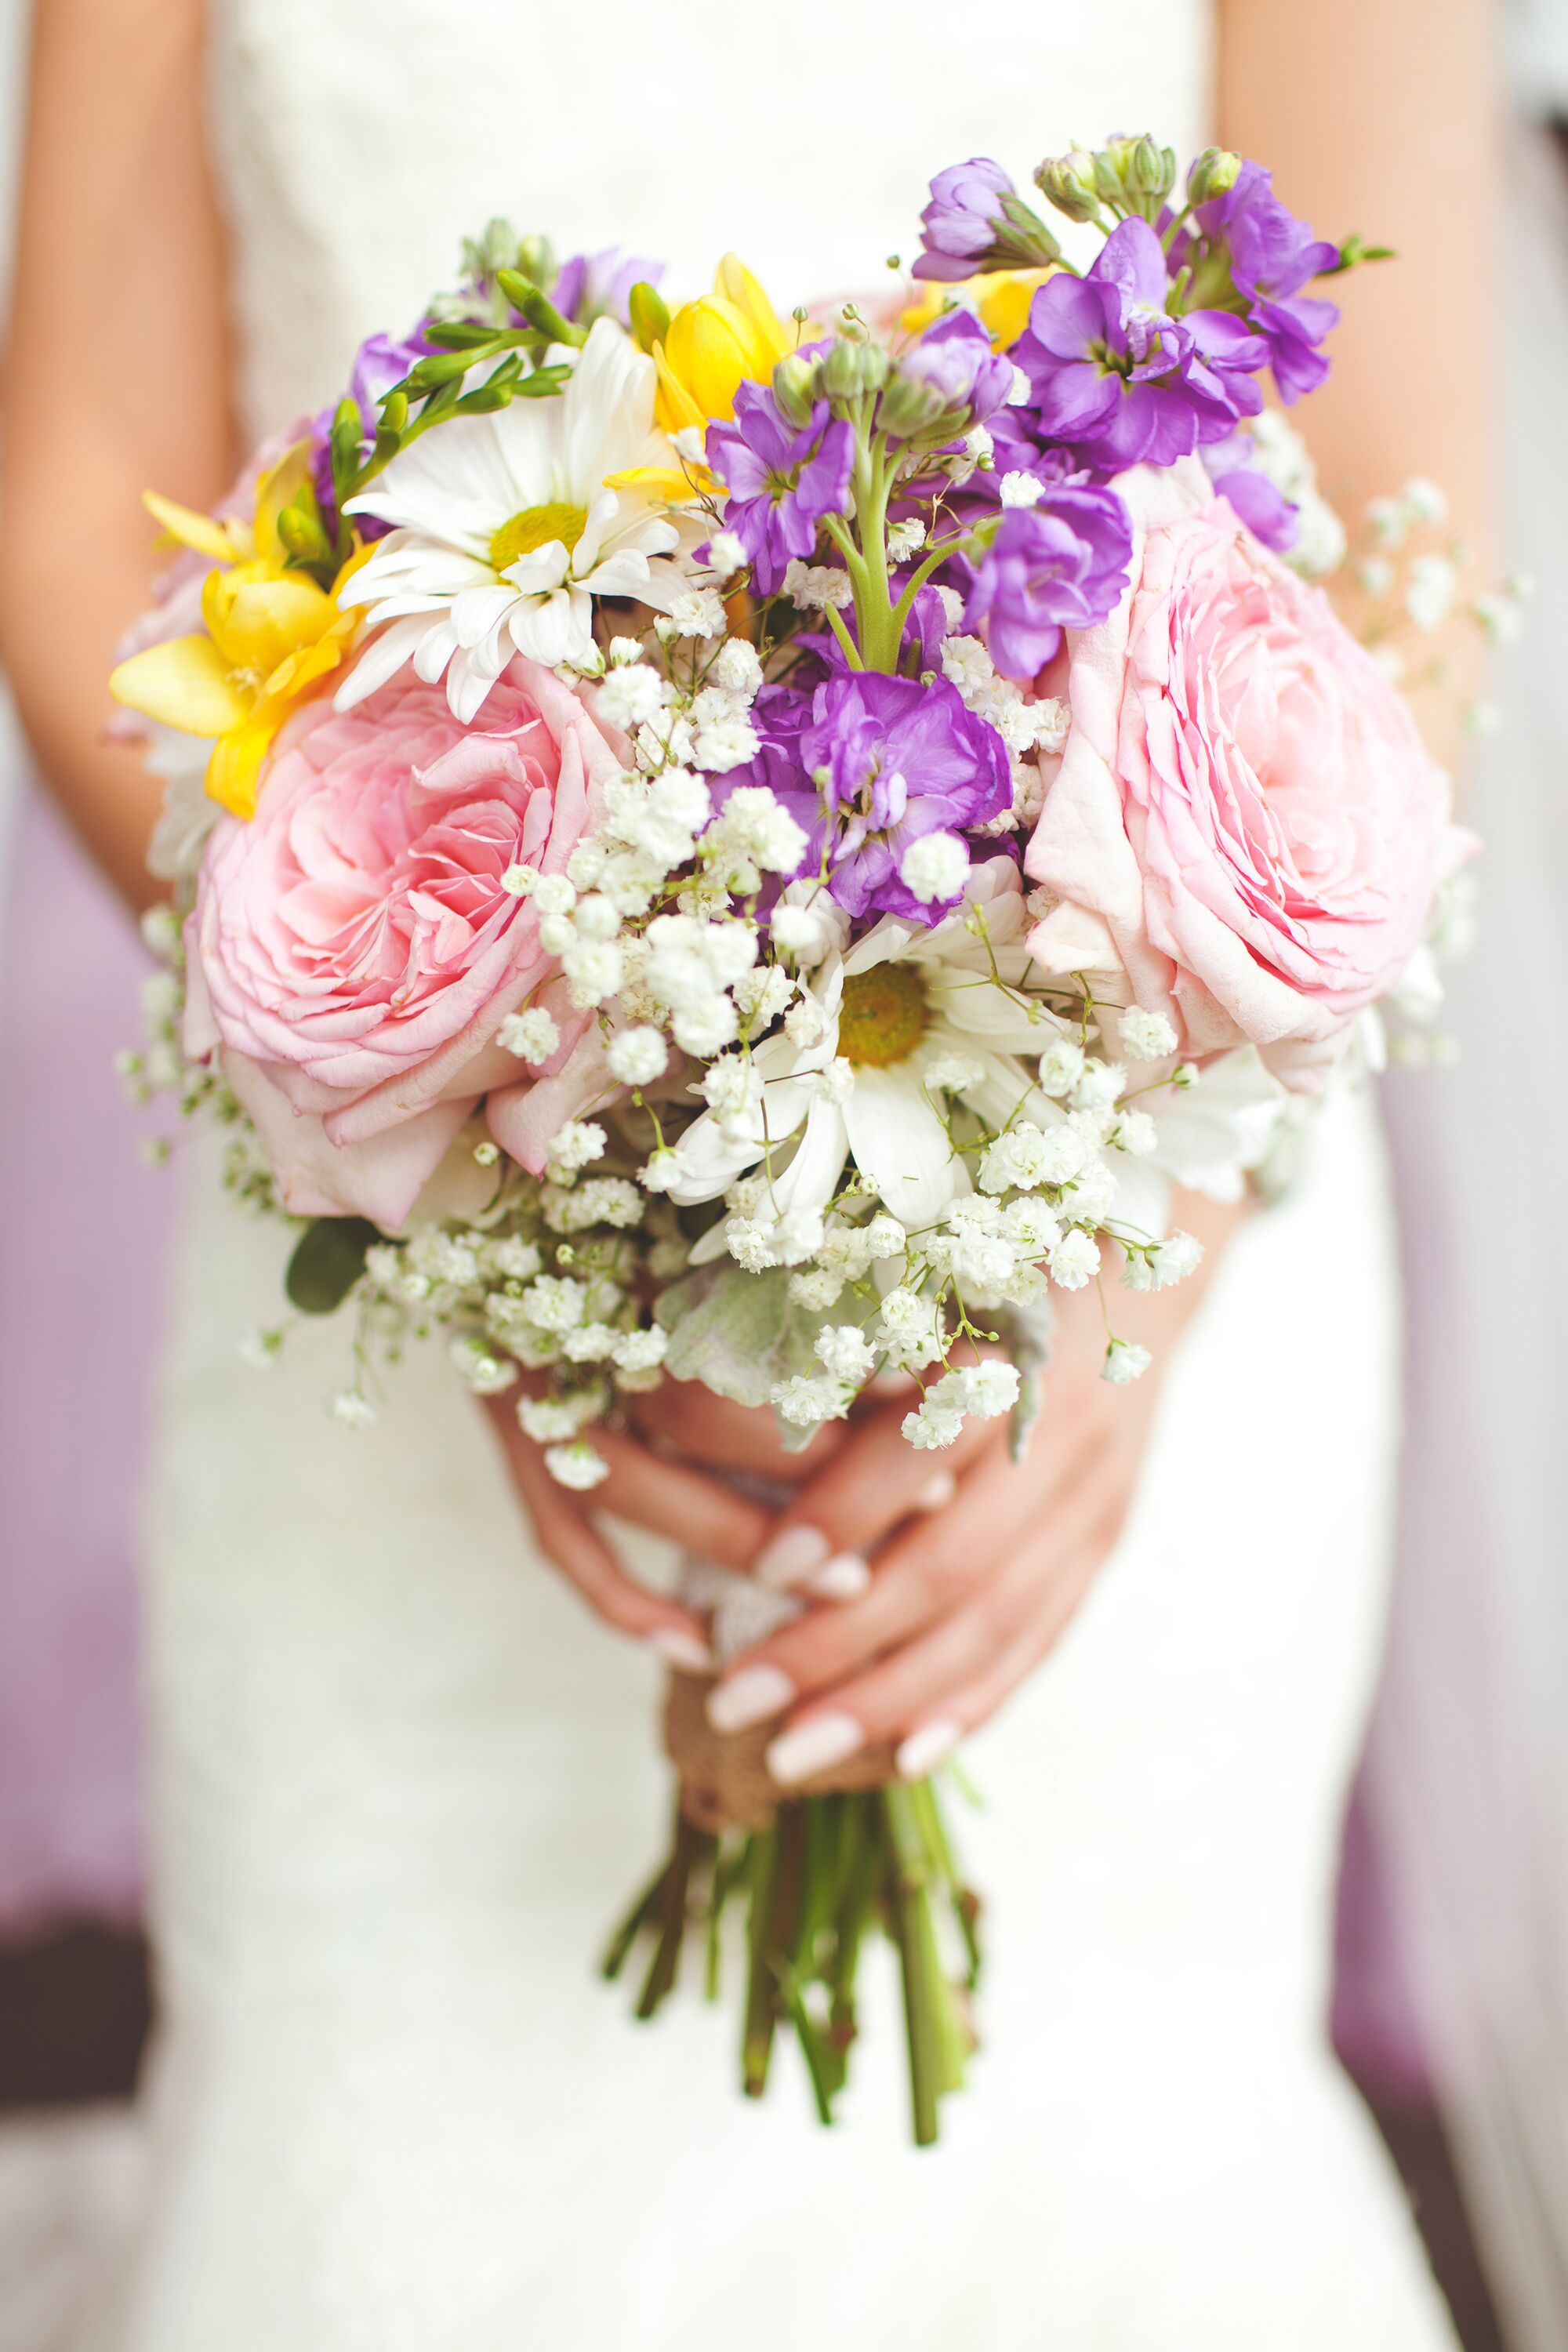 Bridal Bouquet with Garden Roses, Daisies and Freesia